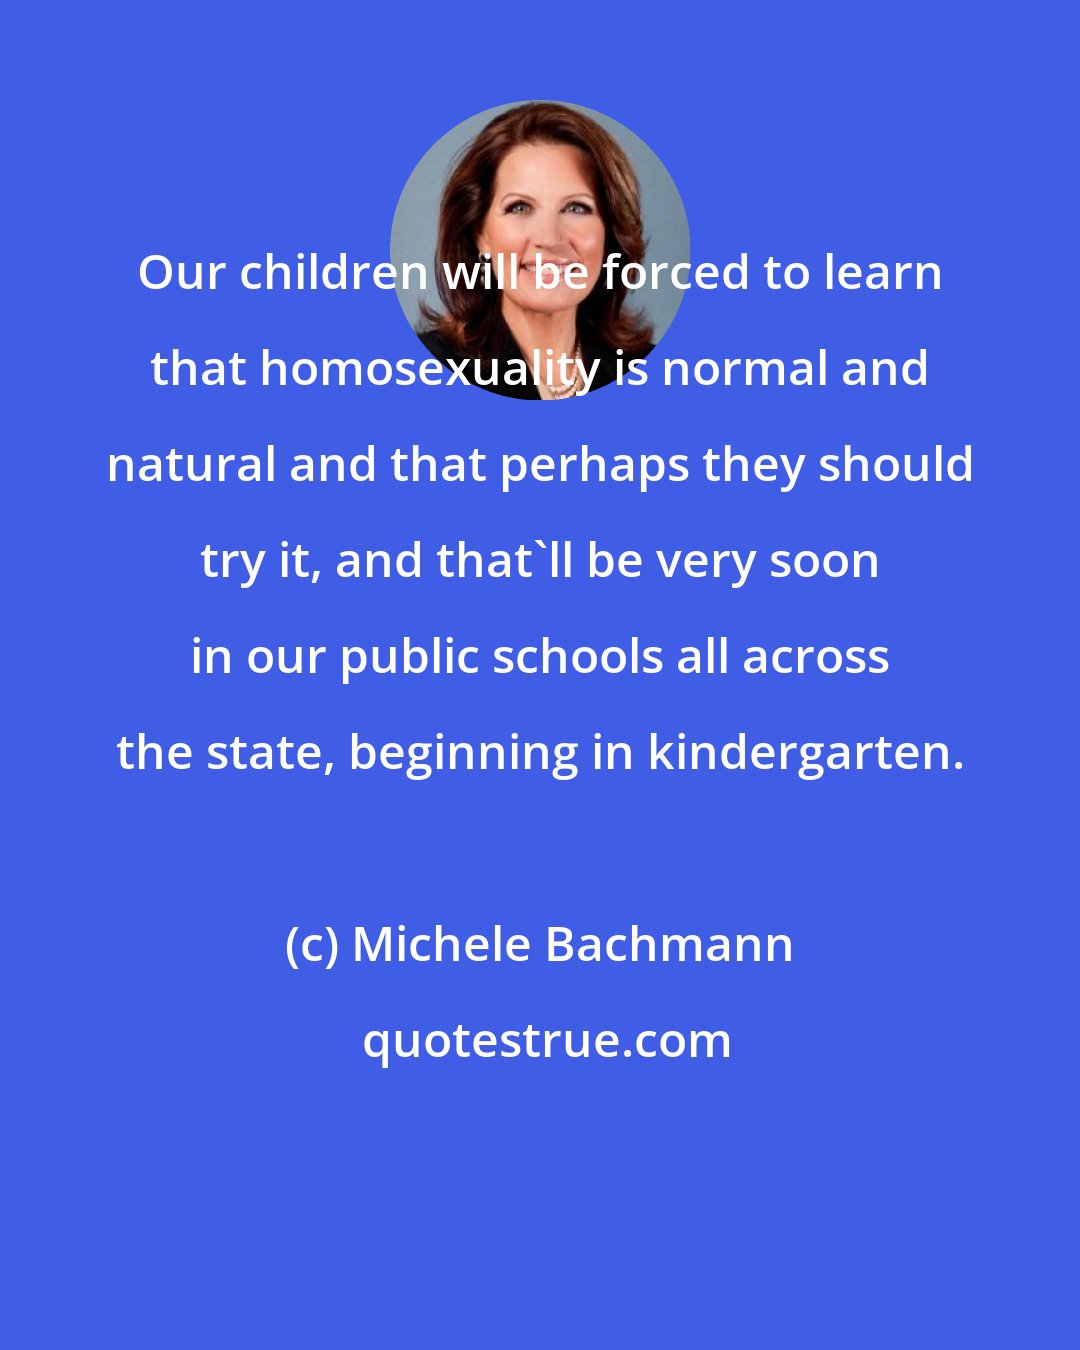 Michele Bachmann: Our children will be forced to learn that homosexuality is normal and natural and that perhaps they should try it, and that'll be very soon in our public schools all across the state, beginning in kindergarten.